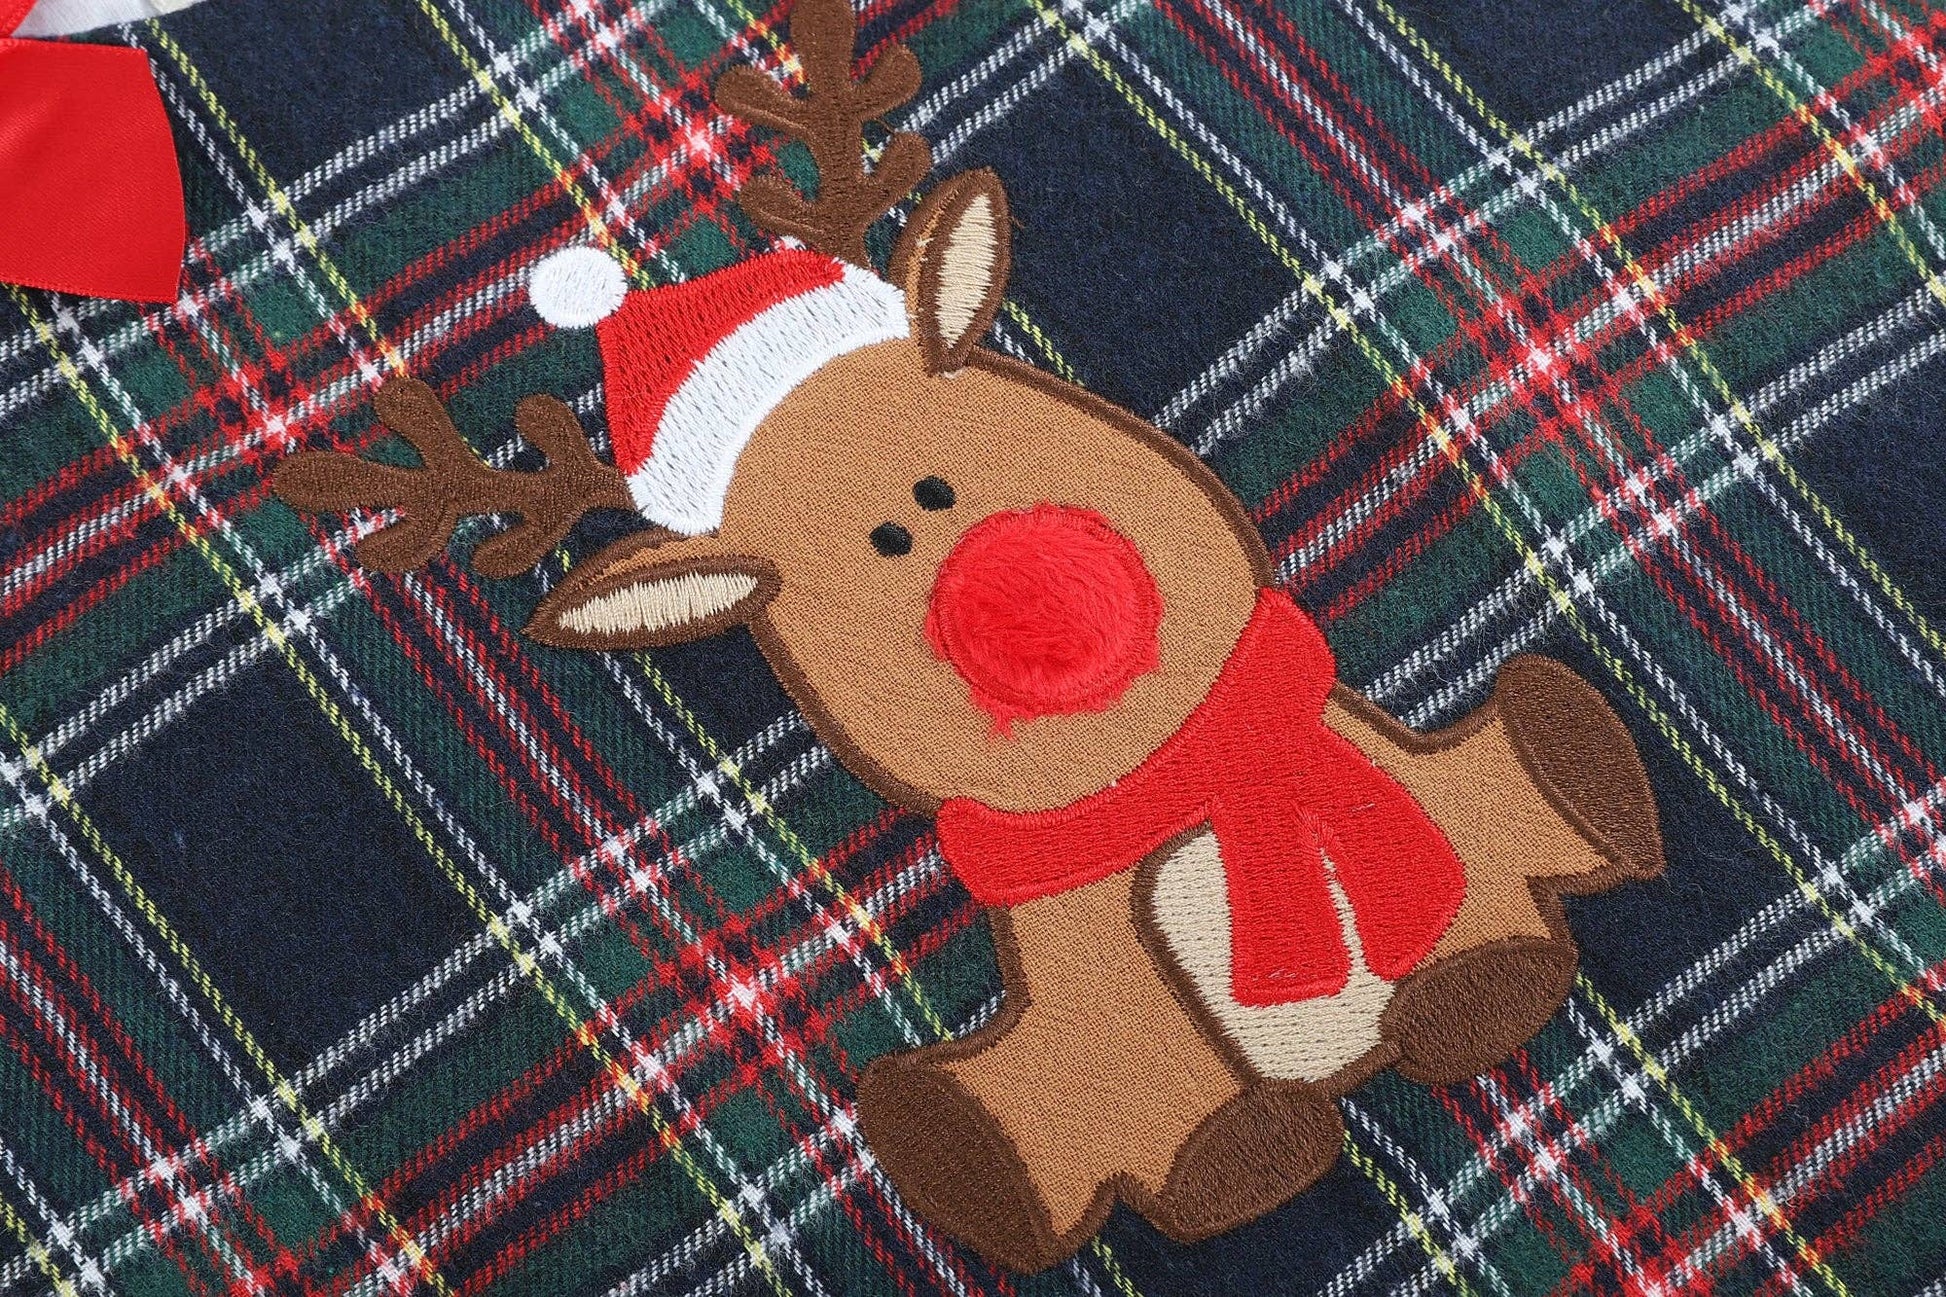 A Navy and Red Plaid Reindeer Ruffle Dress by Lil Cactus on a plaid blanket.